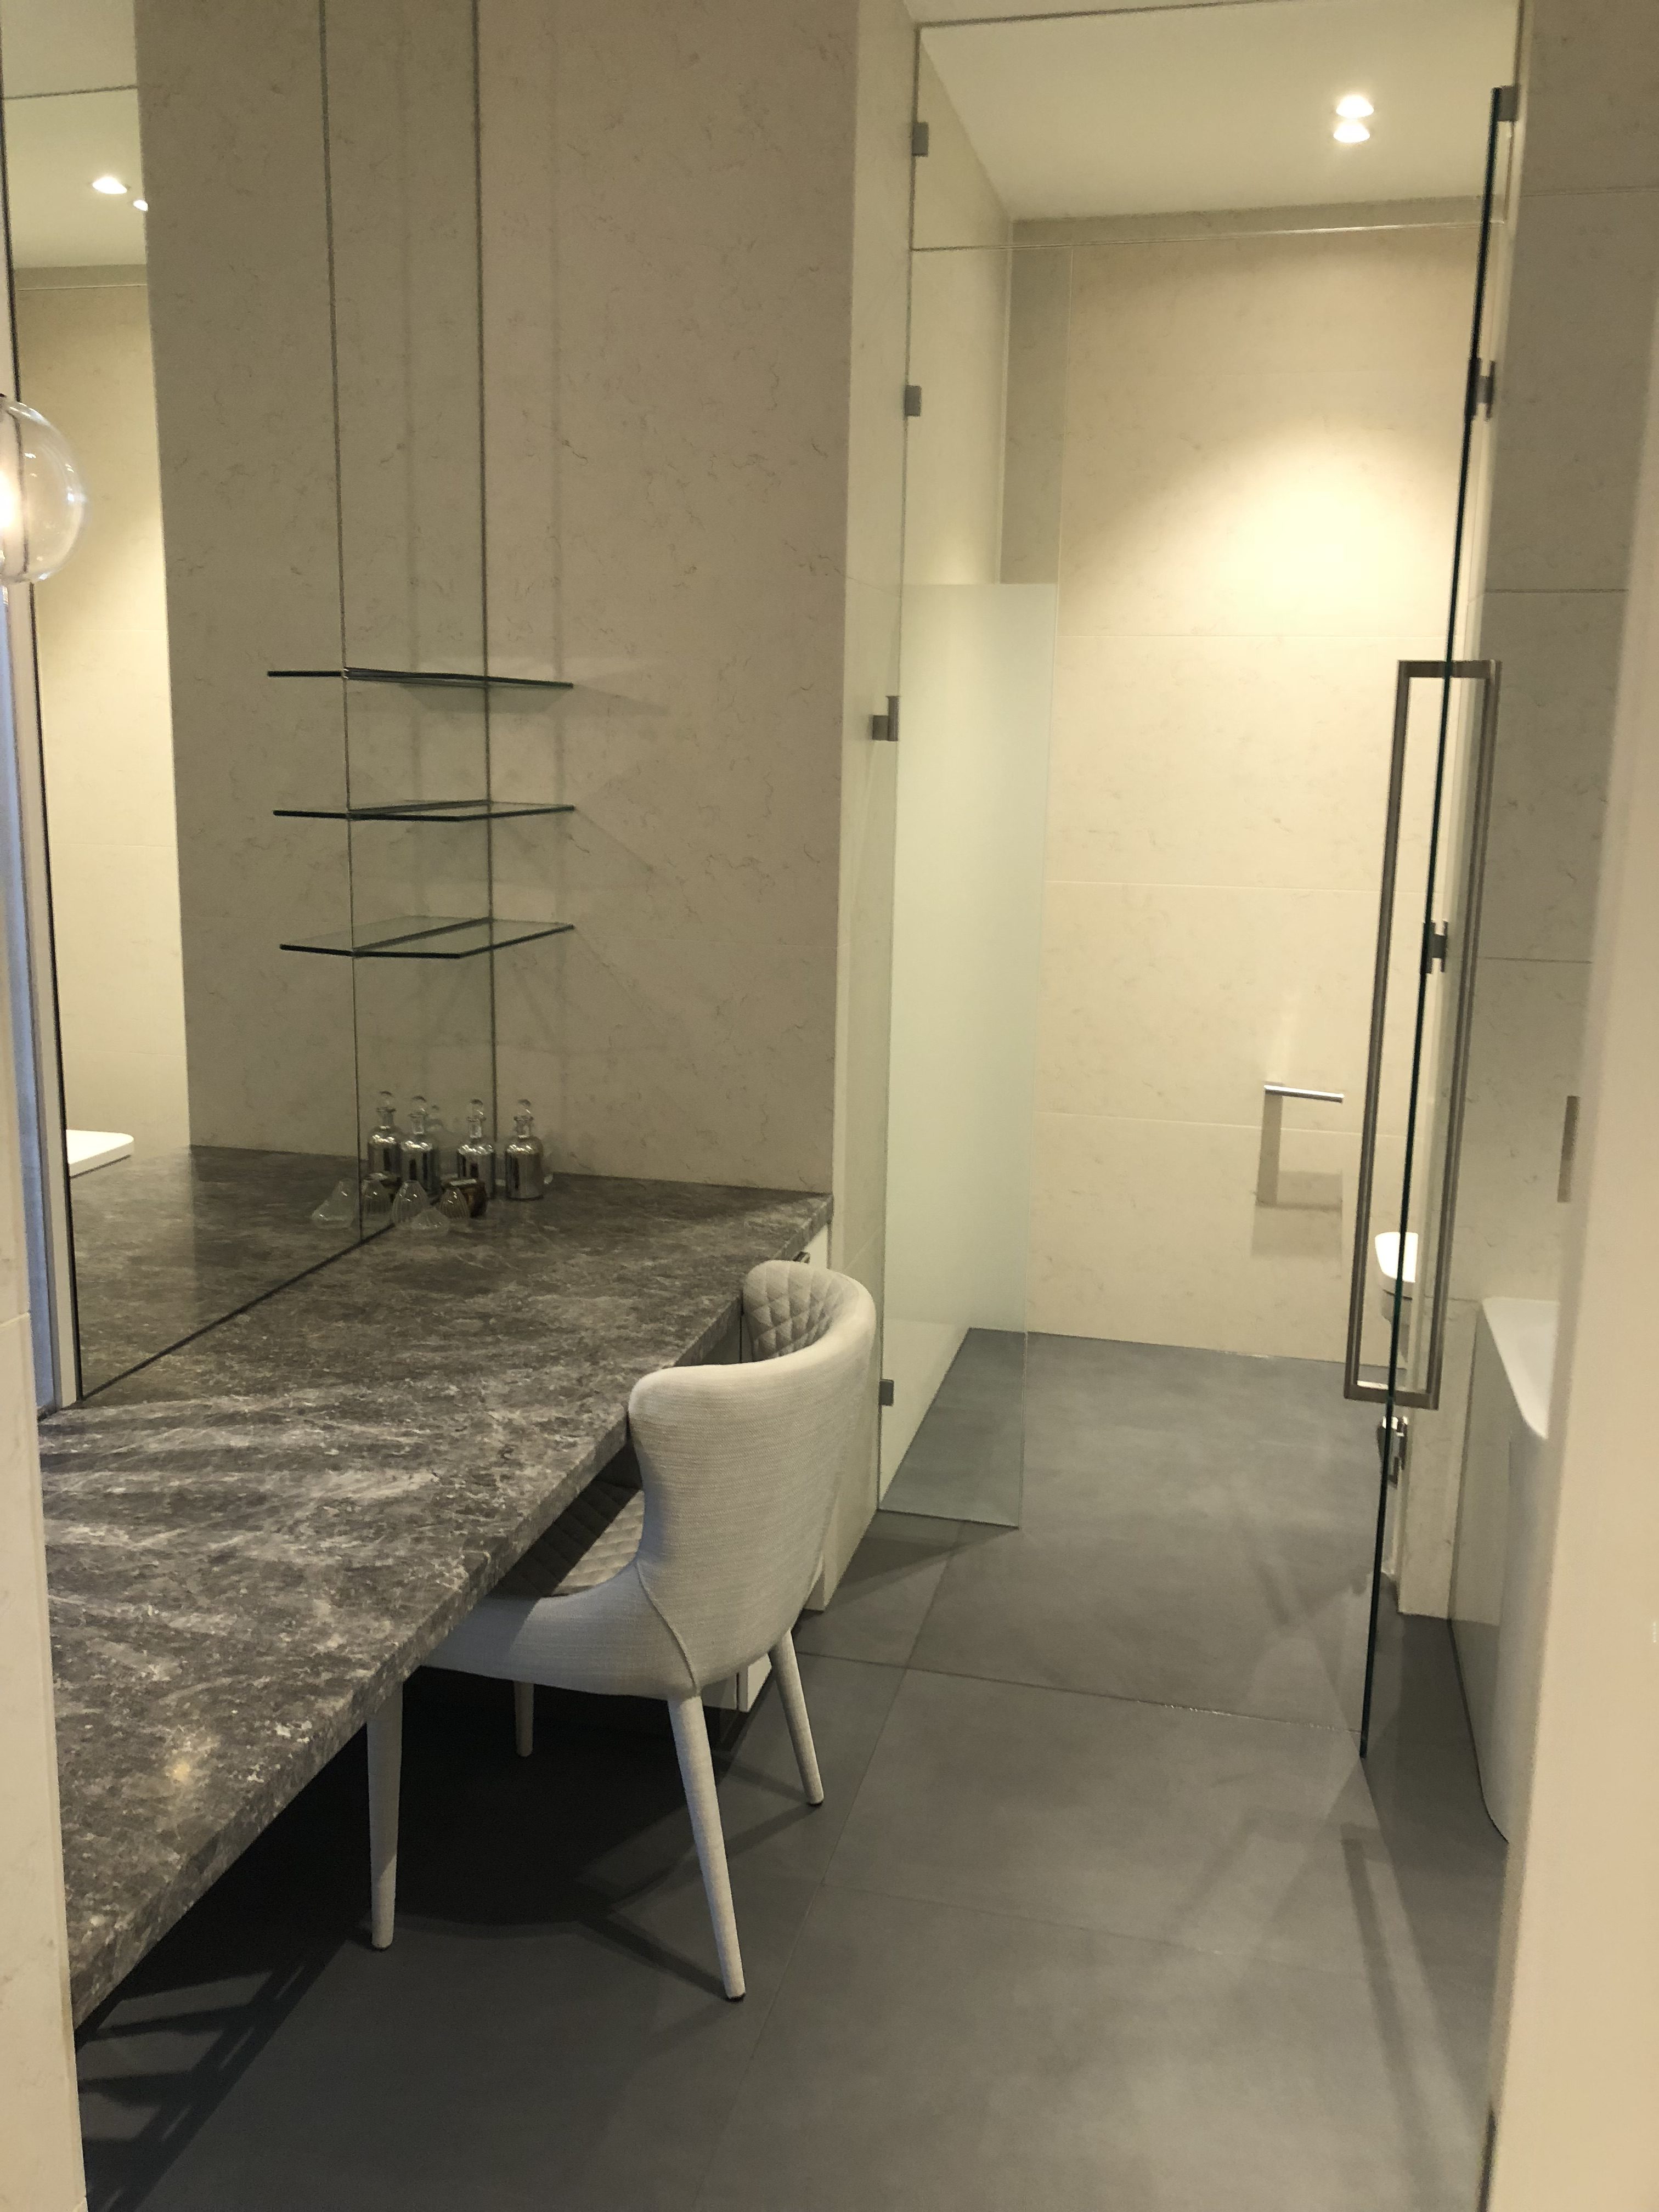 Photo of the example bathroom at the display suite (taken 14/06/18 by PropertyMash)